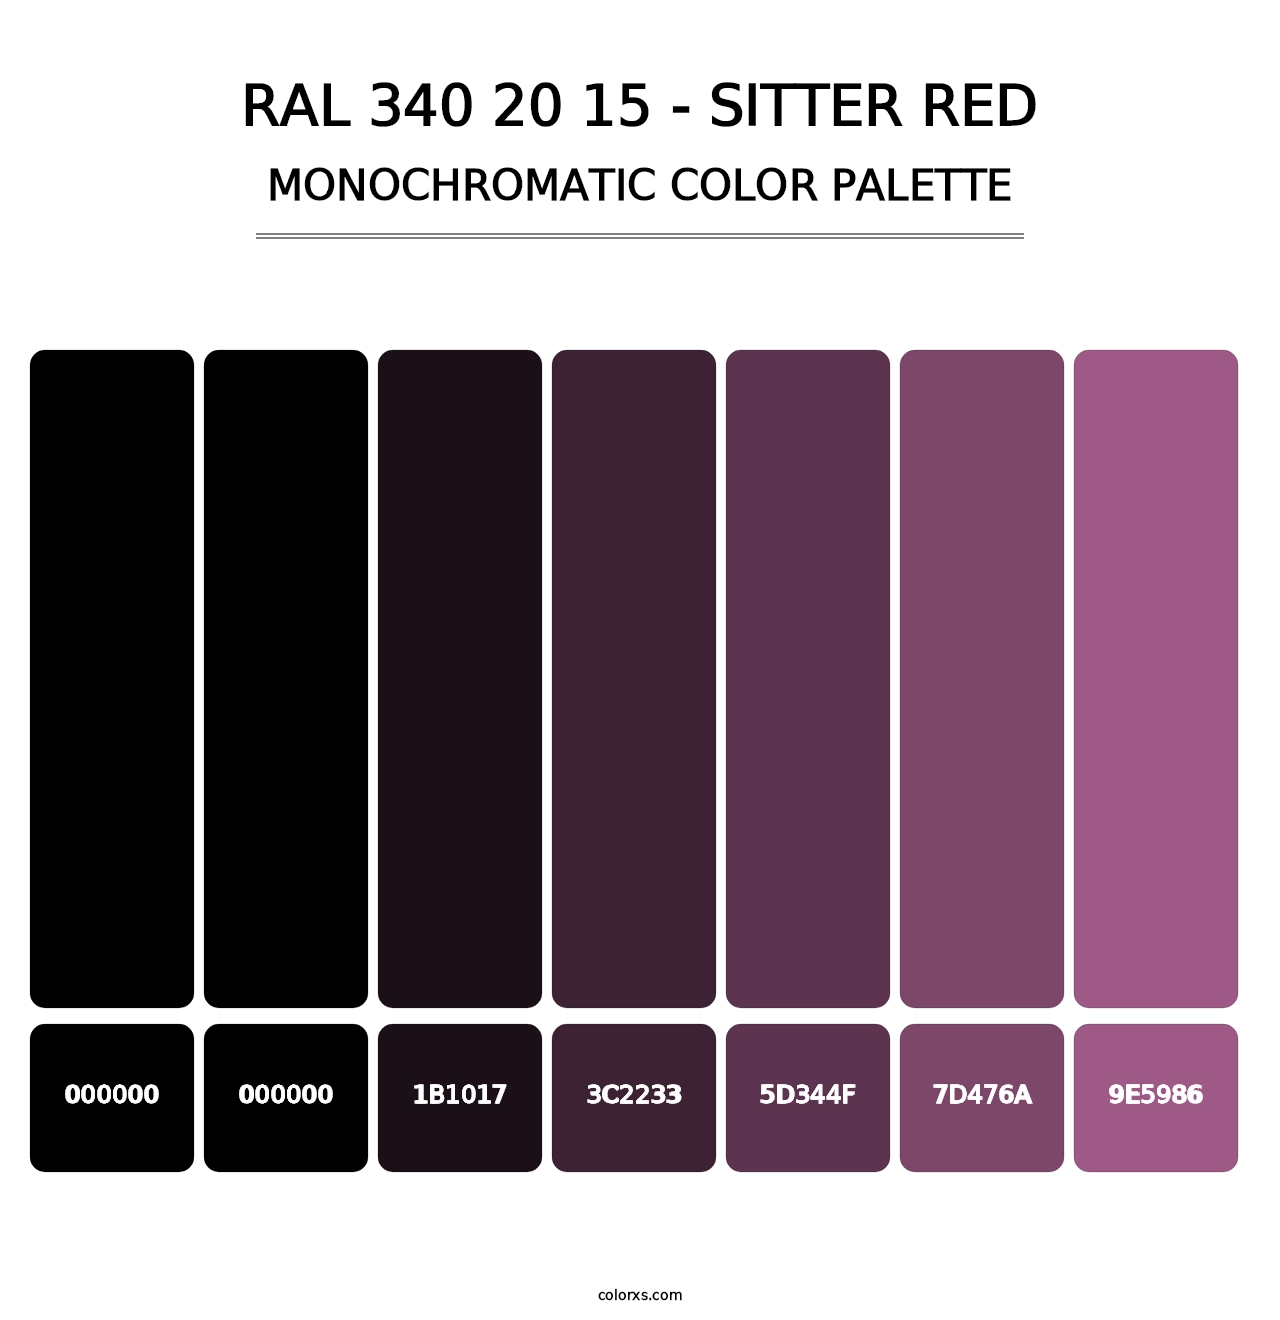 RAL 340 20 15 - Sitter Red - Monochromatic Color Palette